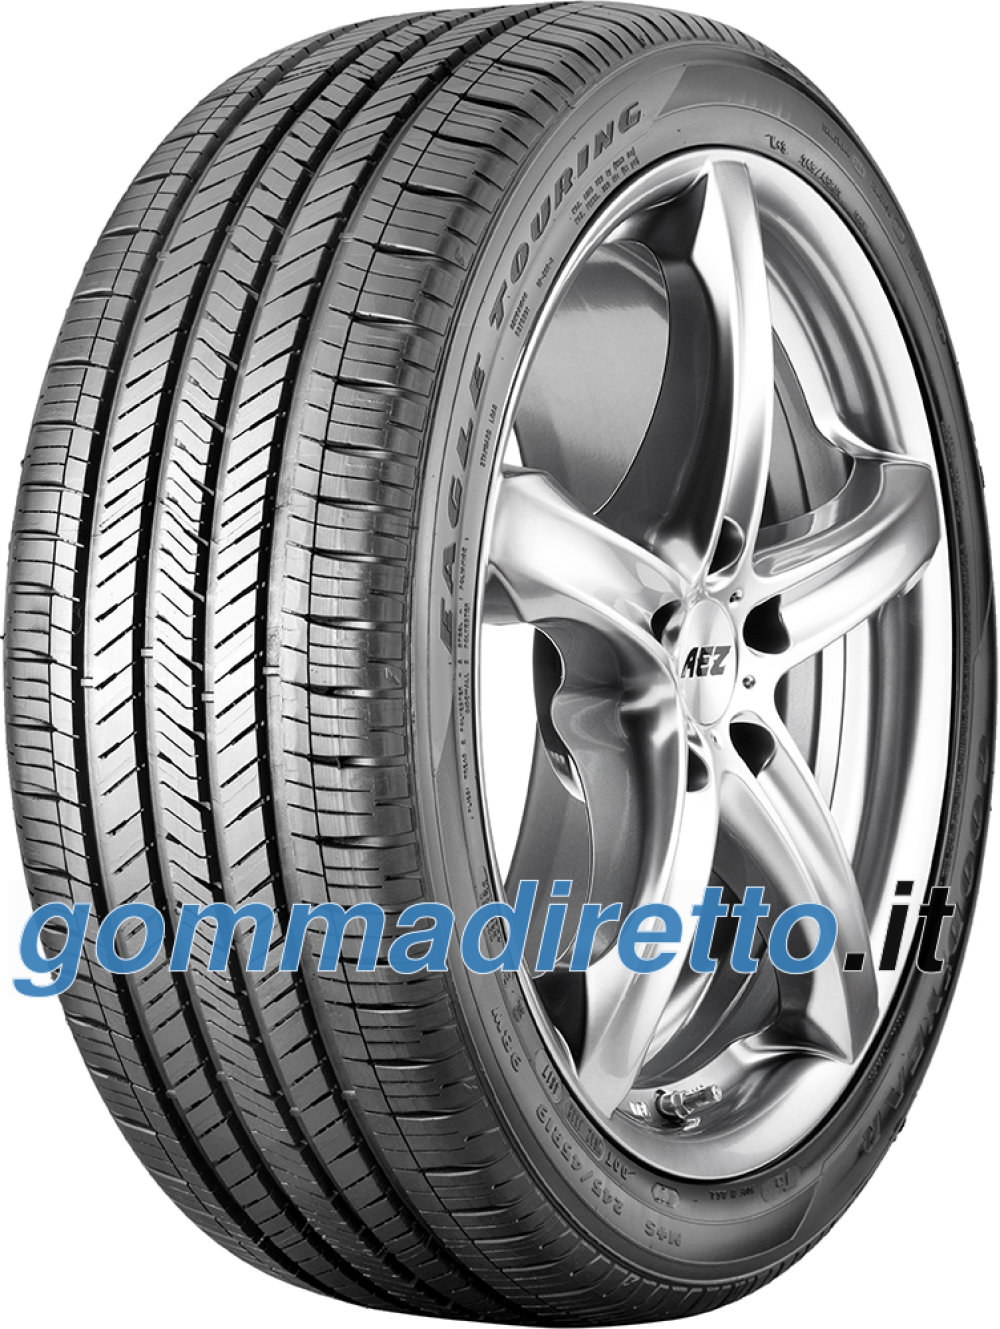 Image of Goodyear Eagle Touring ( 265/35 R21 101H XL, NF0 )